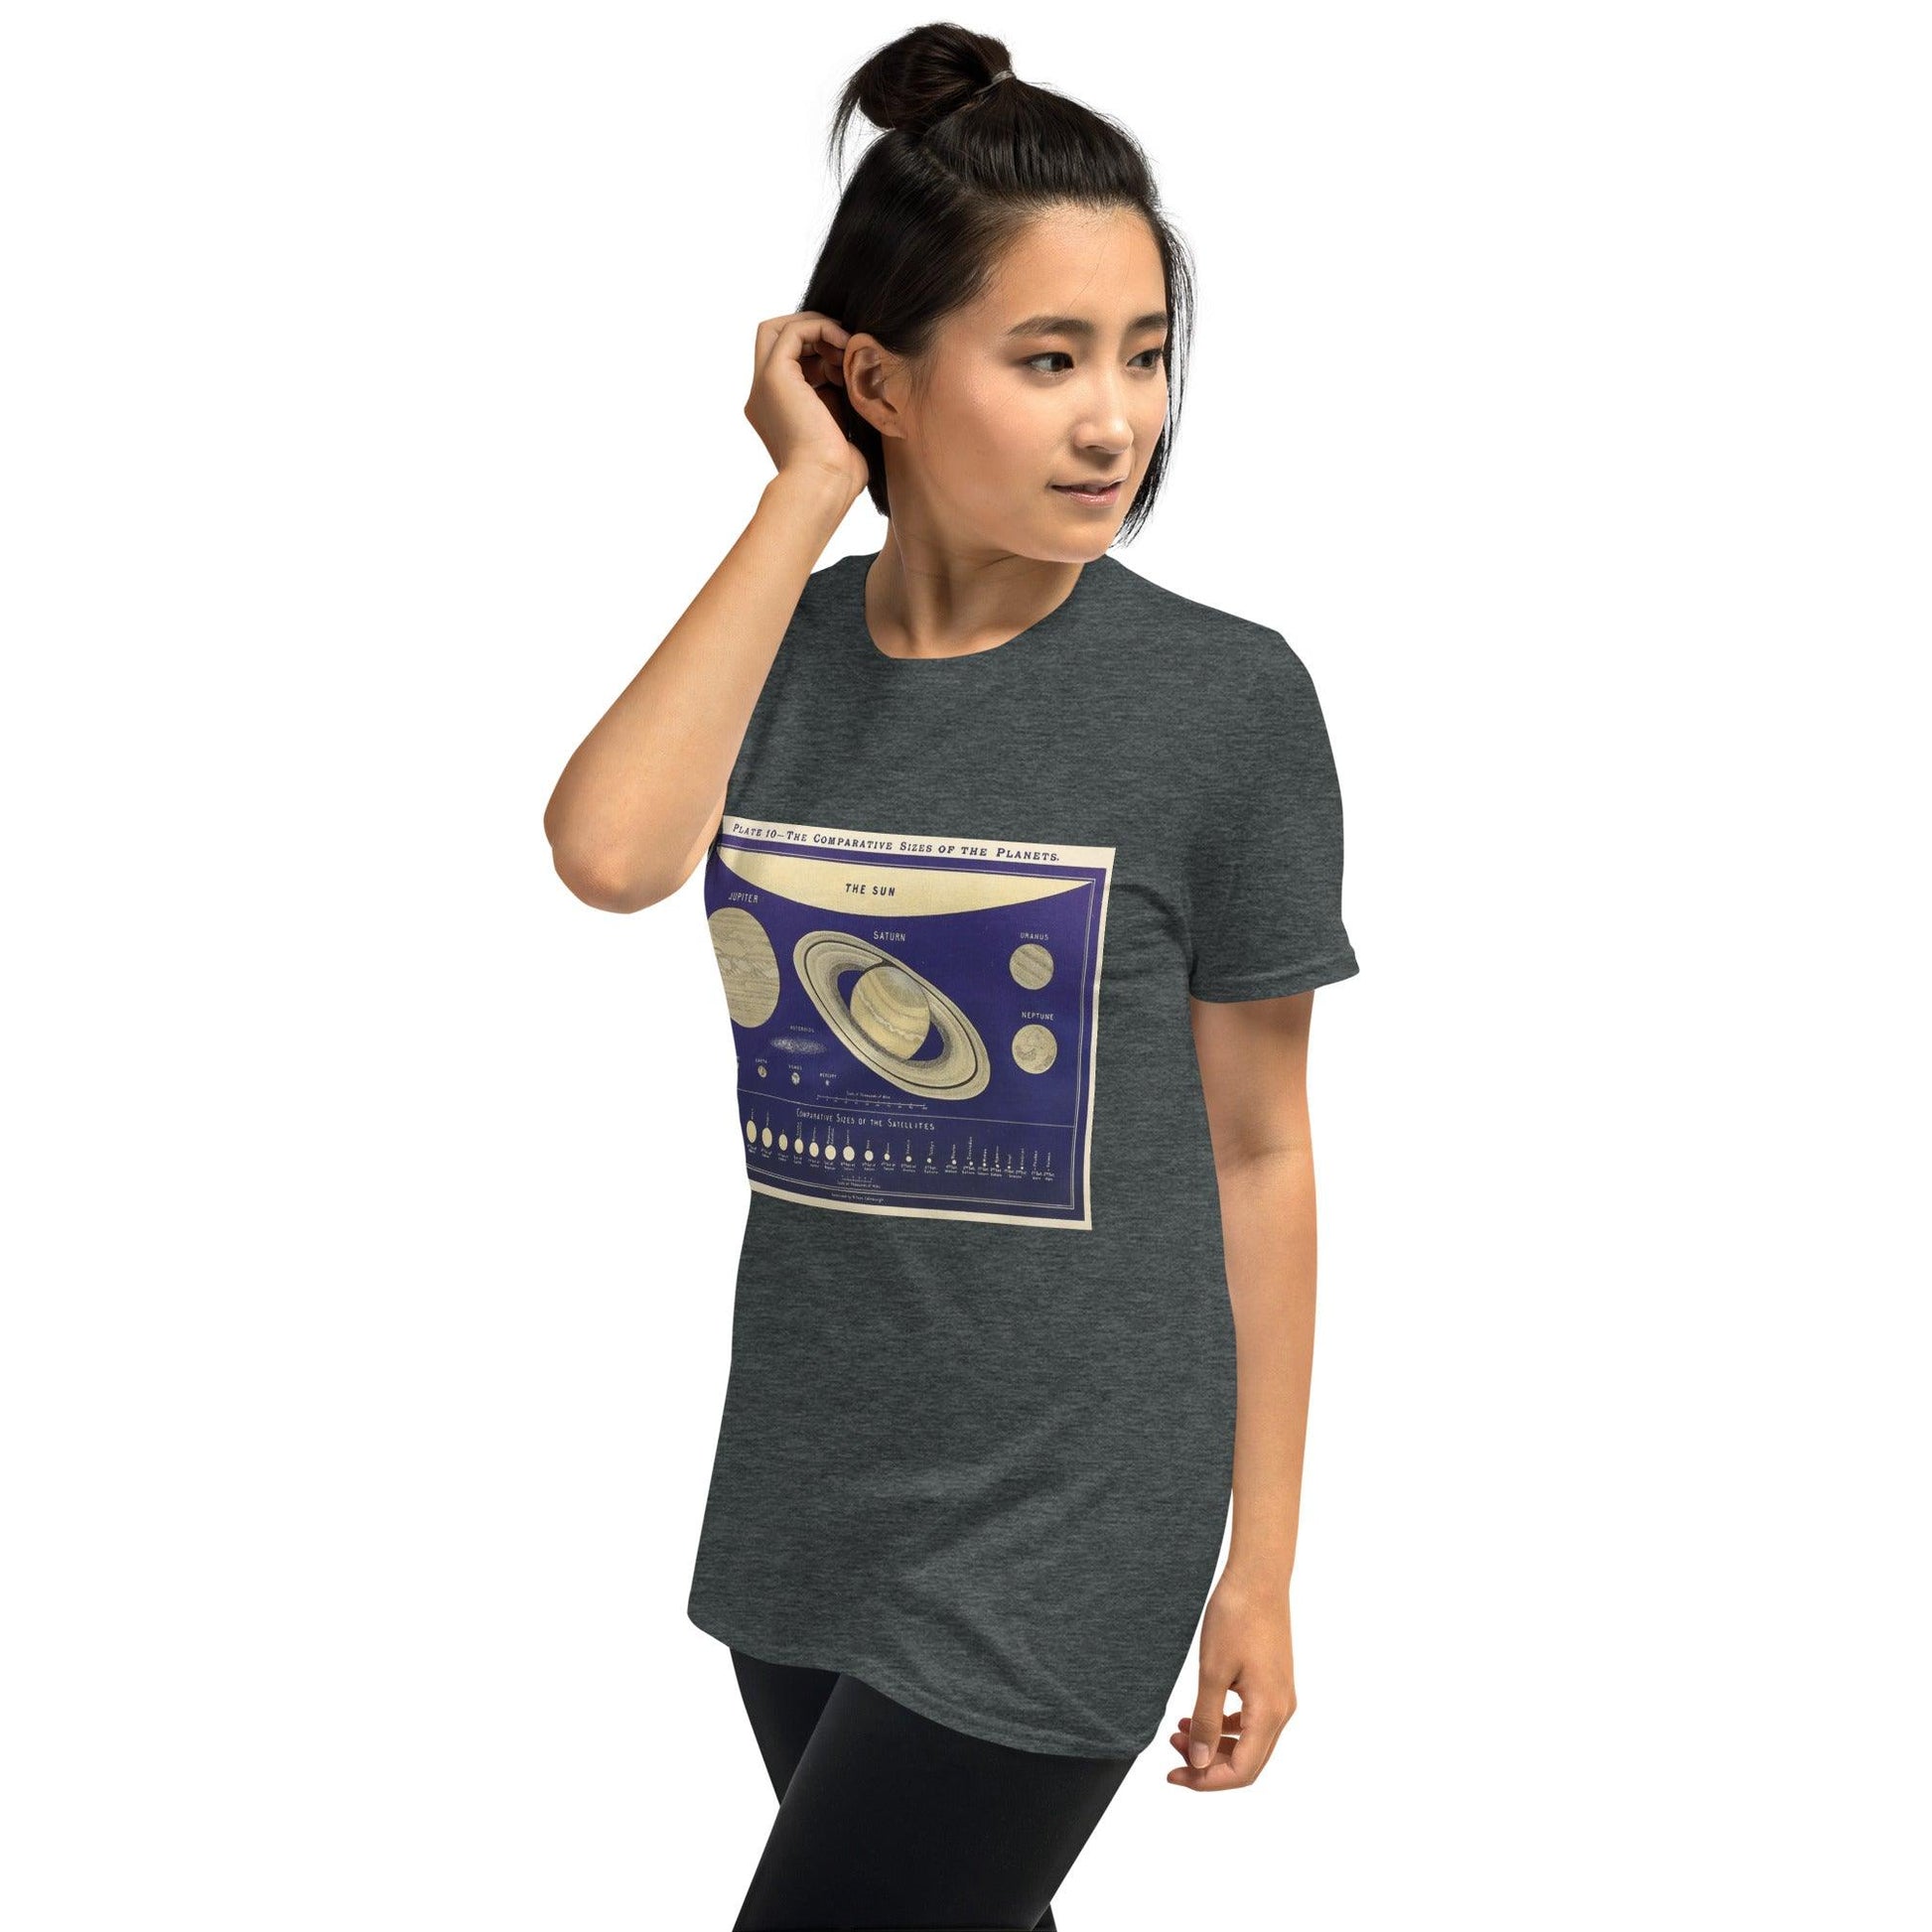 Size Of The Planets - Atlas Astronomy - 1891 - Sir. Willian Peck - Astro TShirts